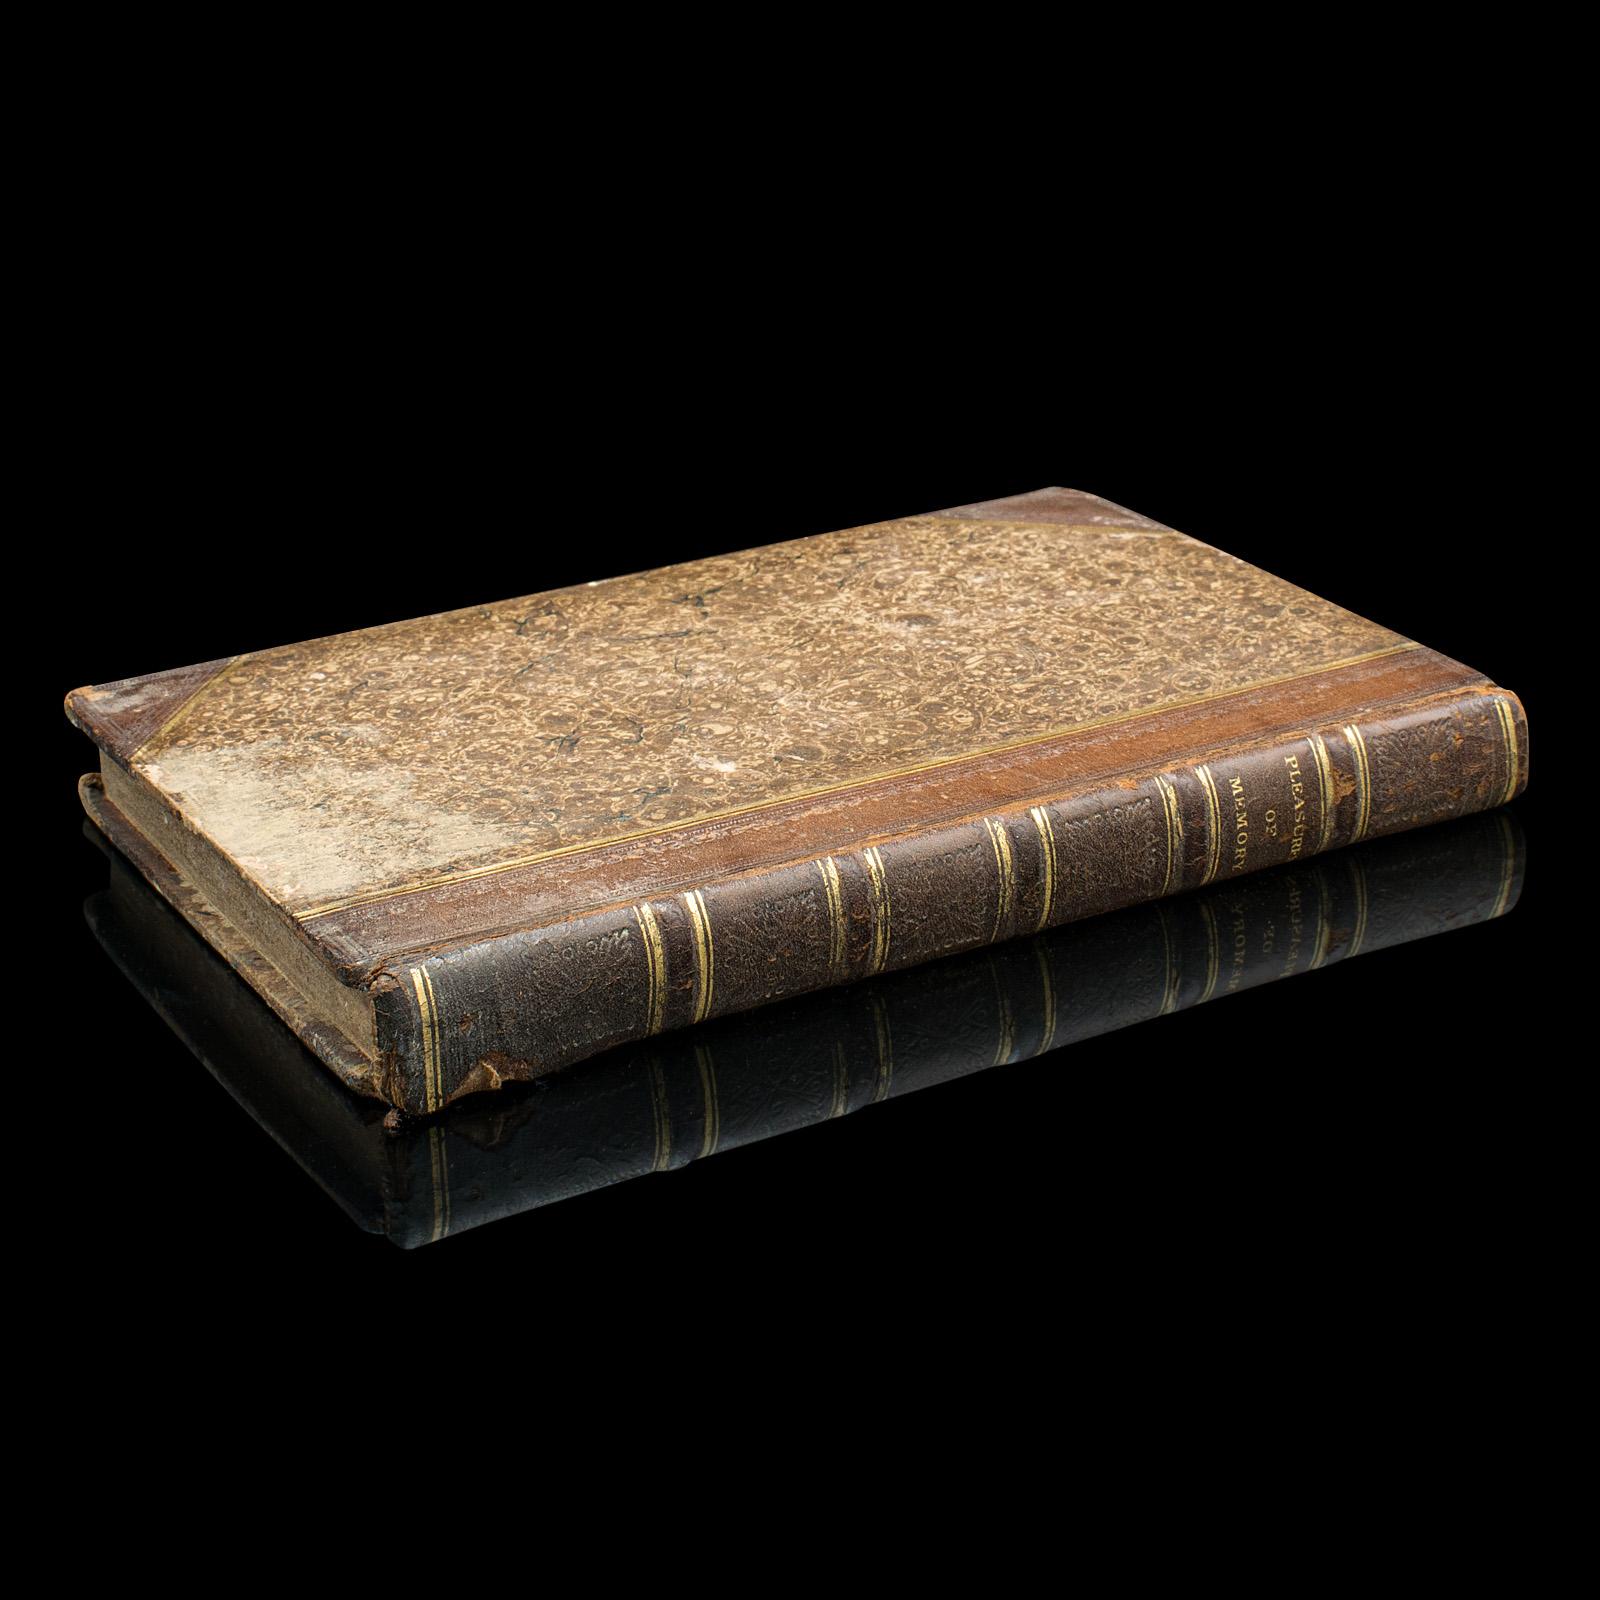 This is an antique copy of Pleasures of Memory by Samuel Rogers. An English, hard bound collection of poetry, published in London in the Georgian period, 1803.

A contemporary of Wordsworth, Byron and other Romantic poets, Samuel Rogers (1763 -